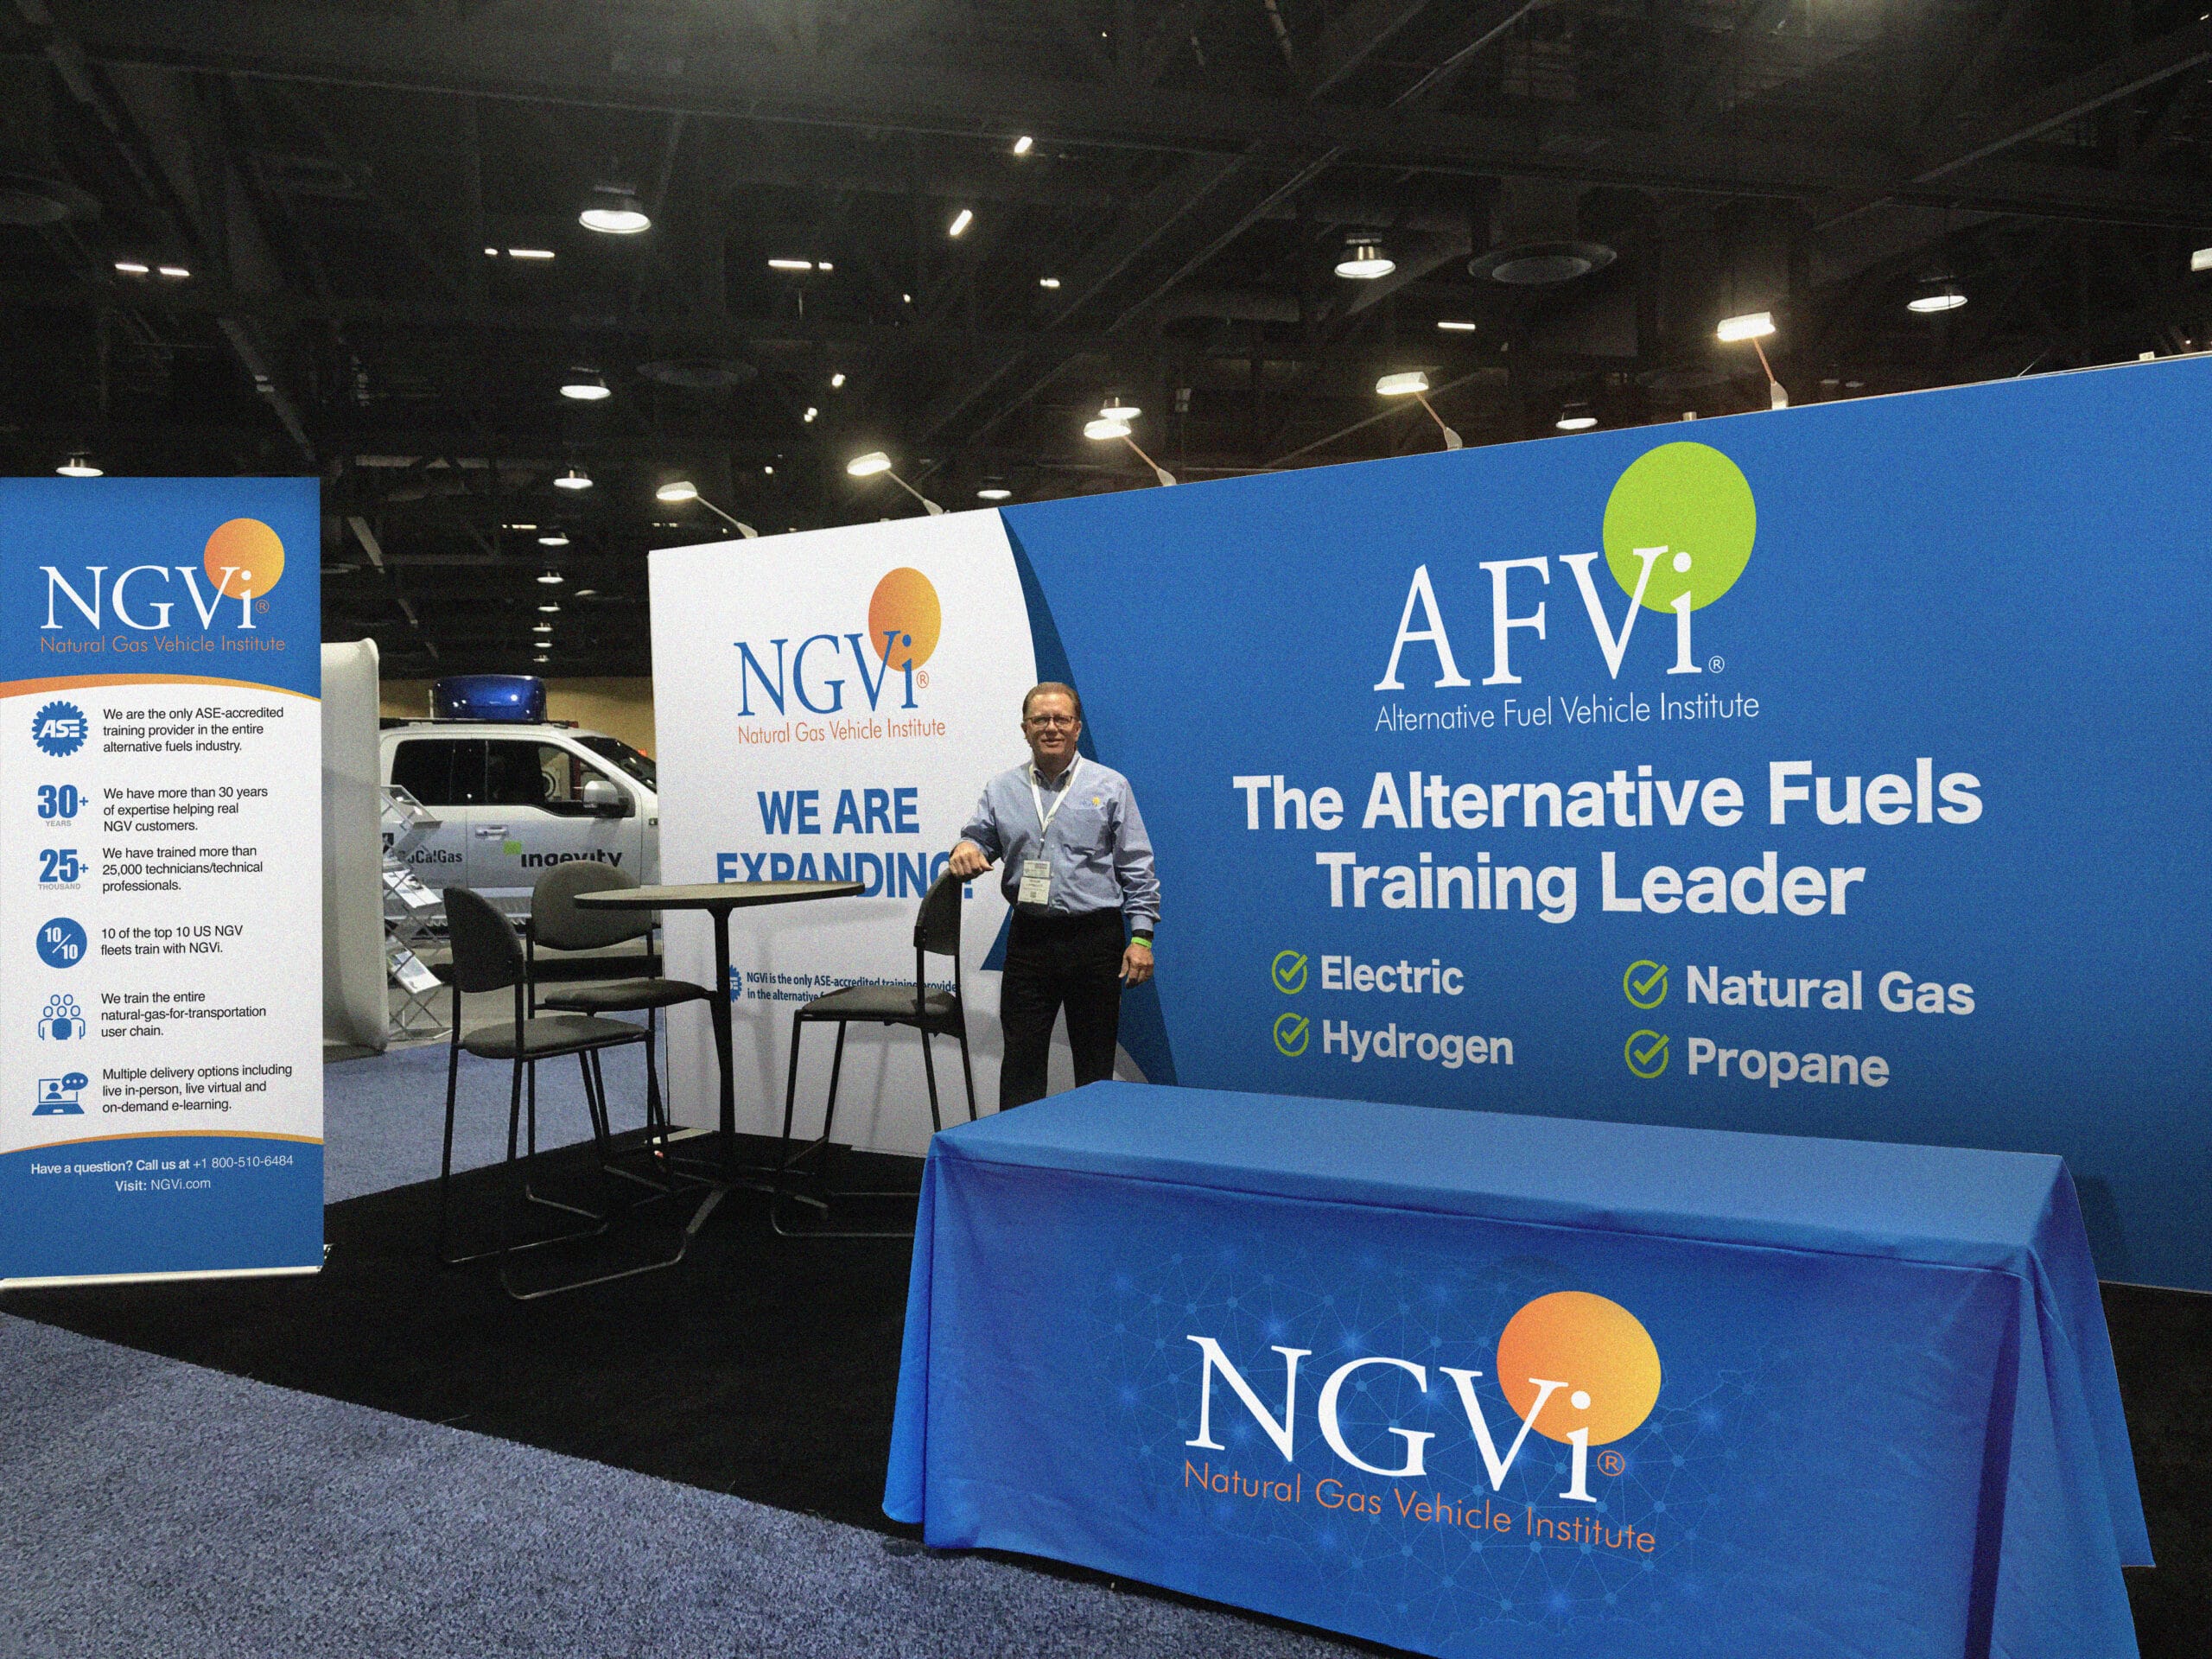 An NGVi employee stands at their ACT booth while display boards announce AFVi, the Alternative Fuel Vehicle Institute.